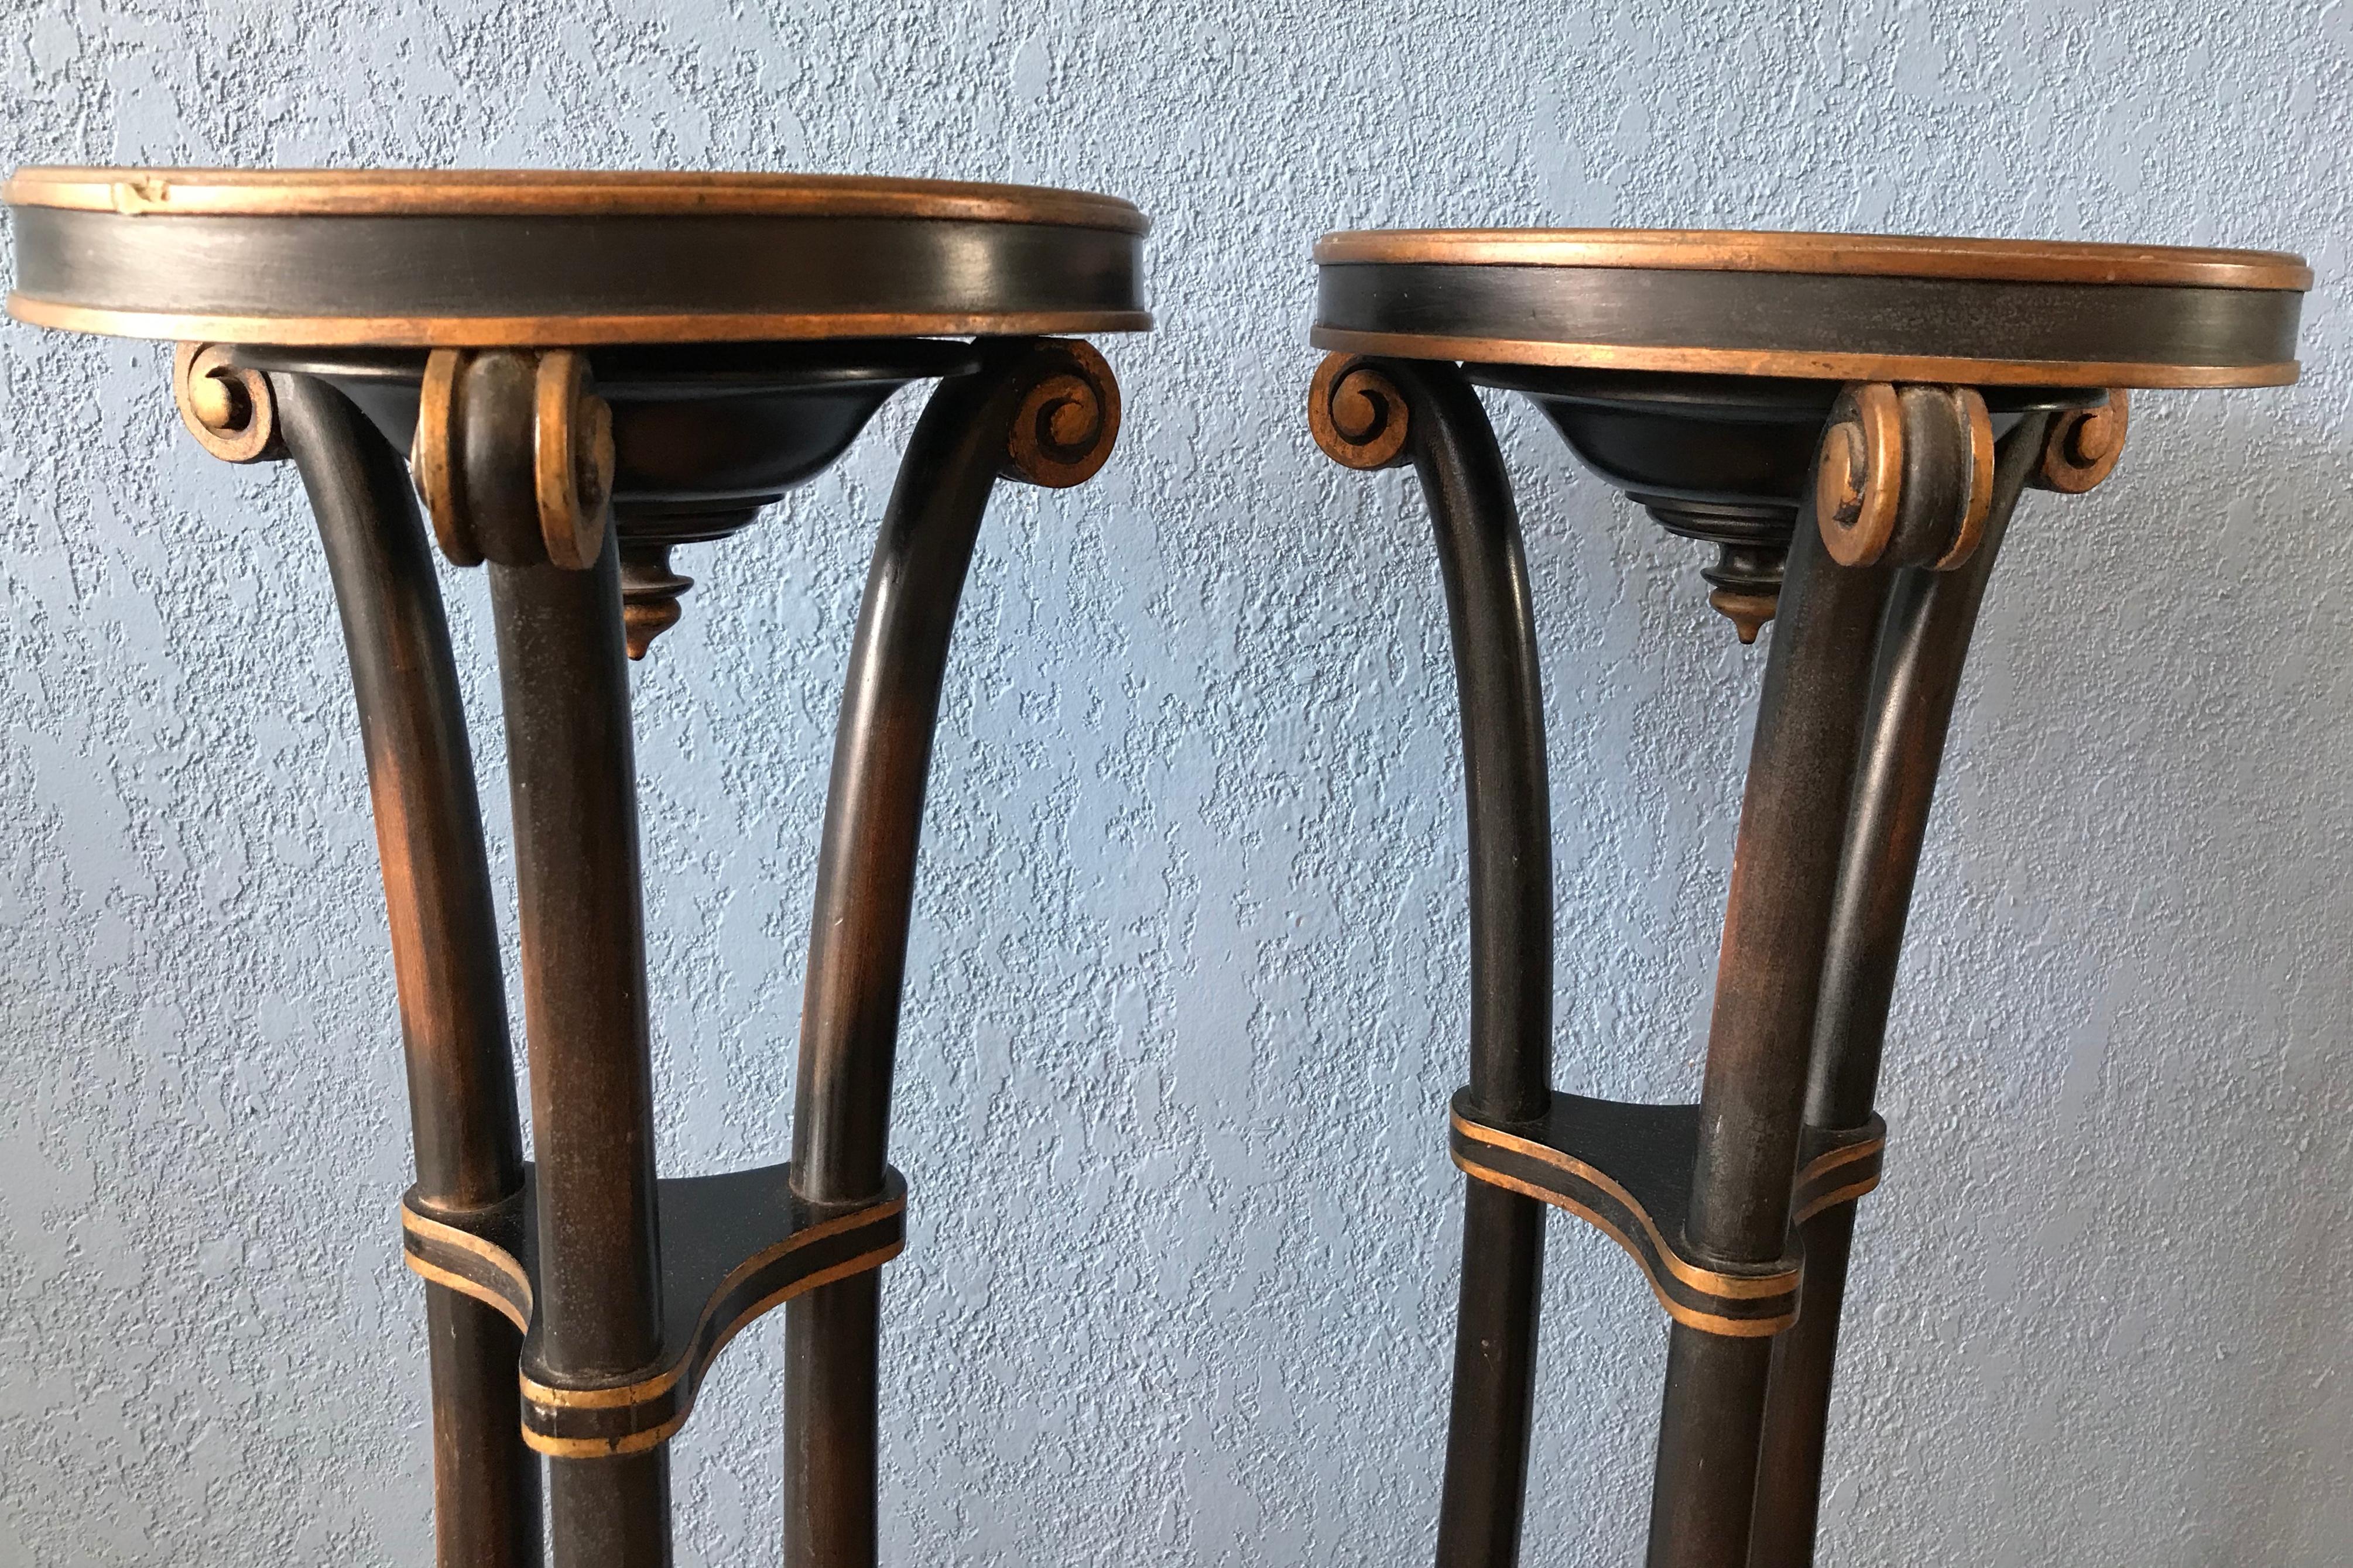 Italian Pair of Hoof Accented Fern Stands